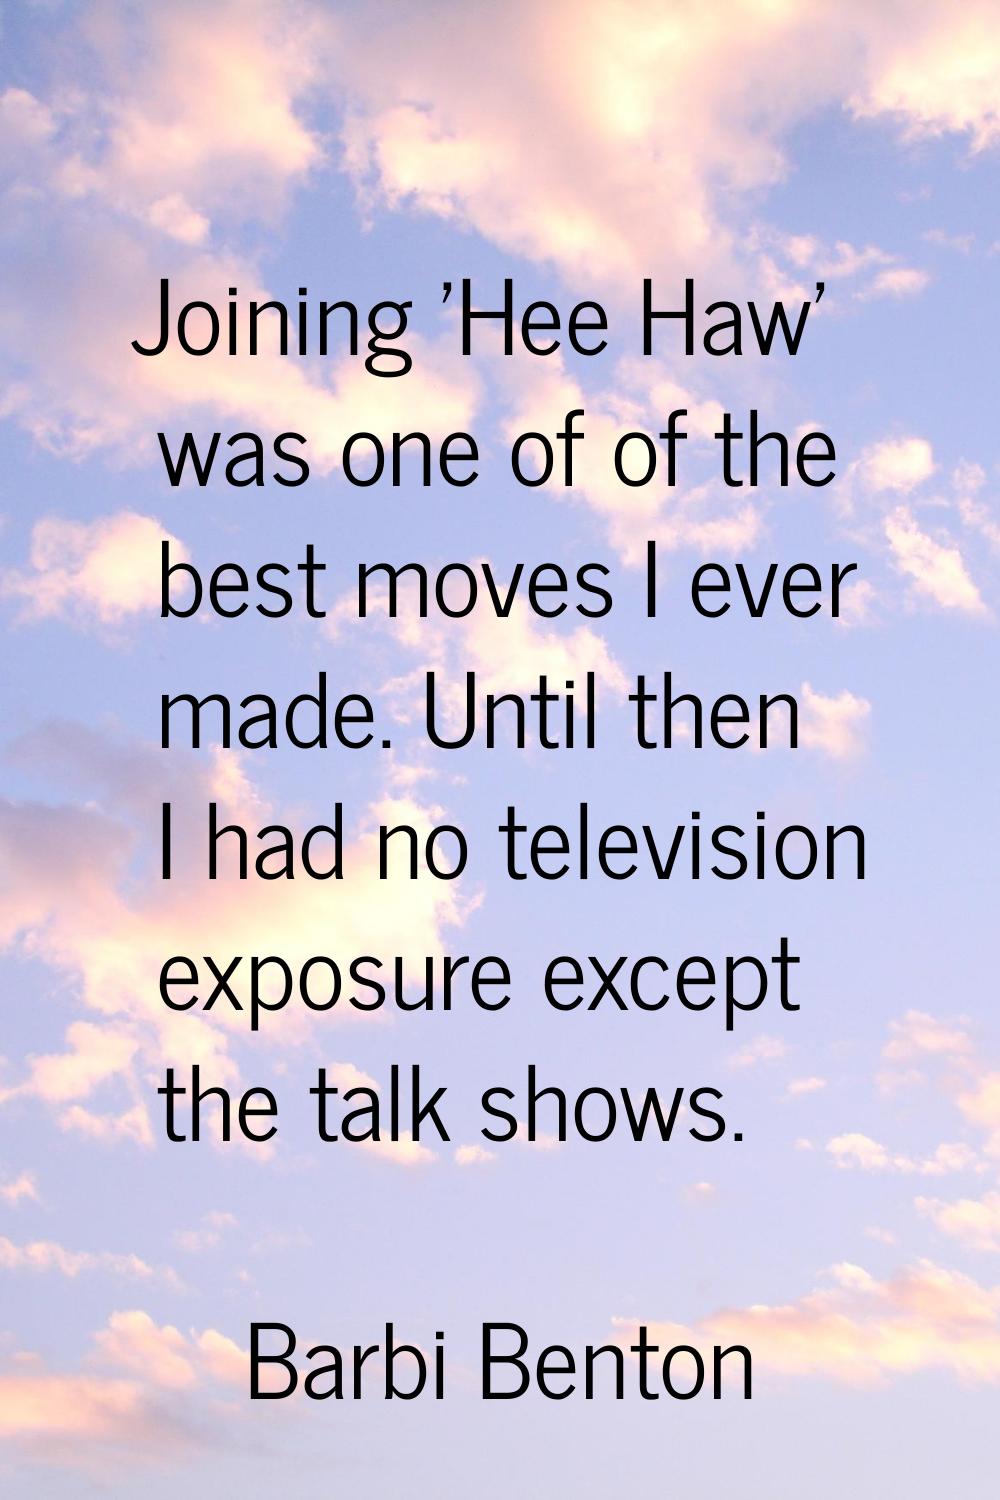 Joining 'Hee Haw' was one of of the best moves I ever made. Until then I had no television exposure